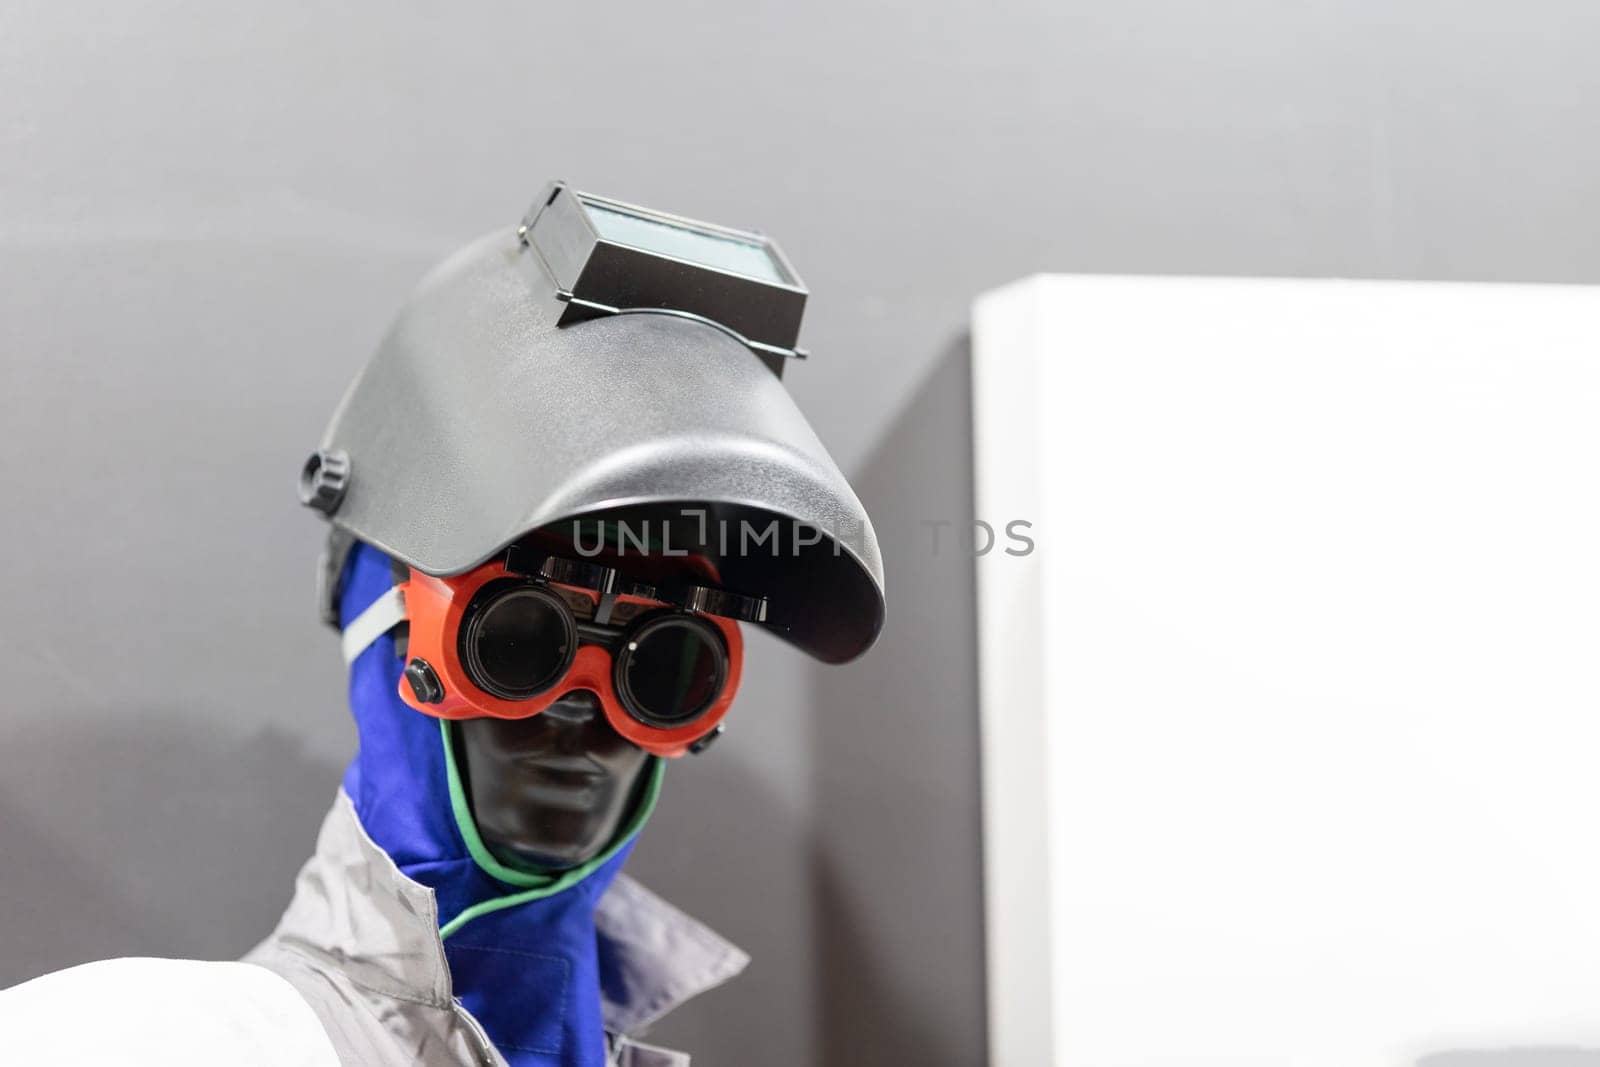 A mannequin wearing safety sunglasses holding and showcasing a tool.